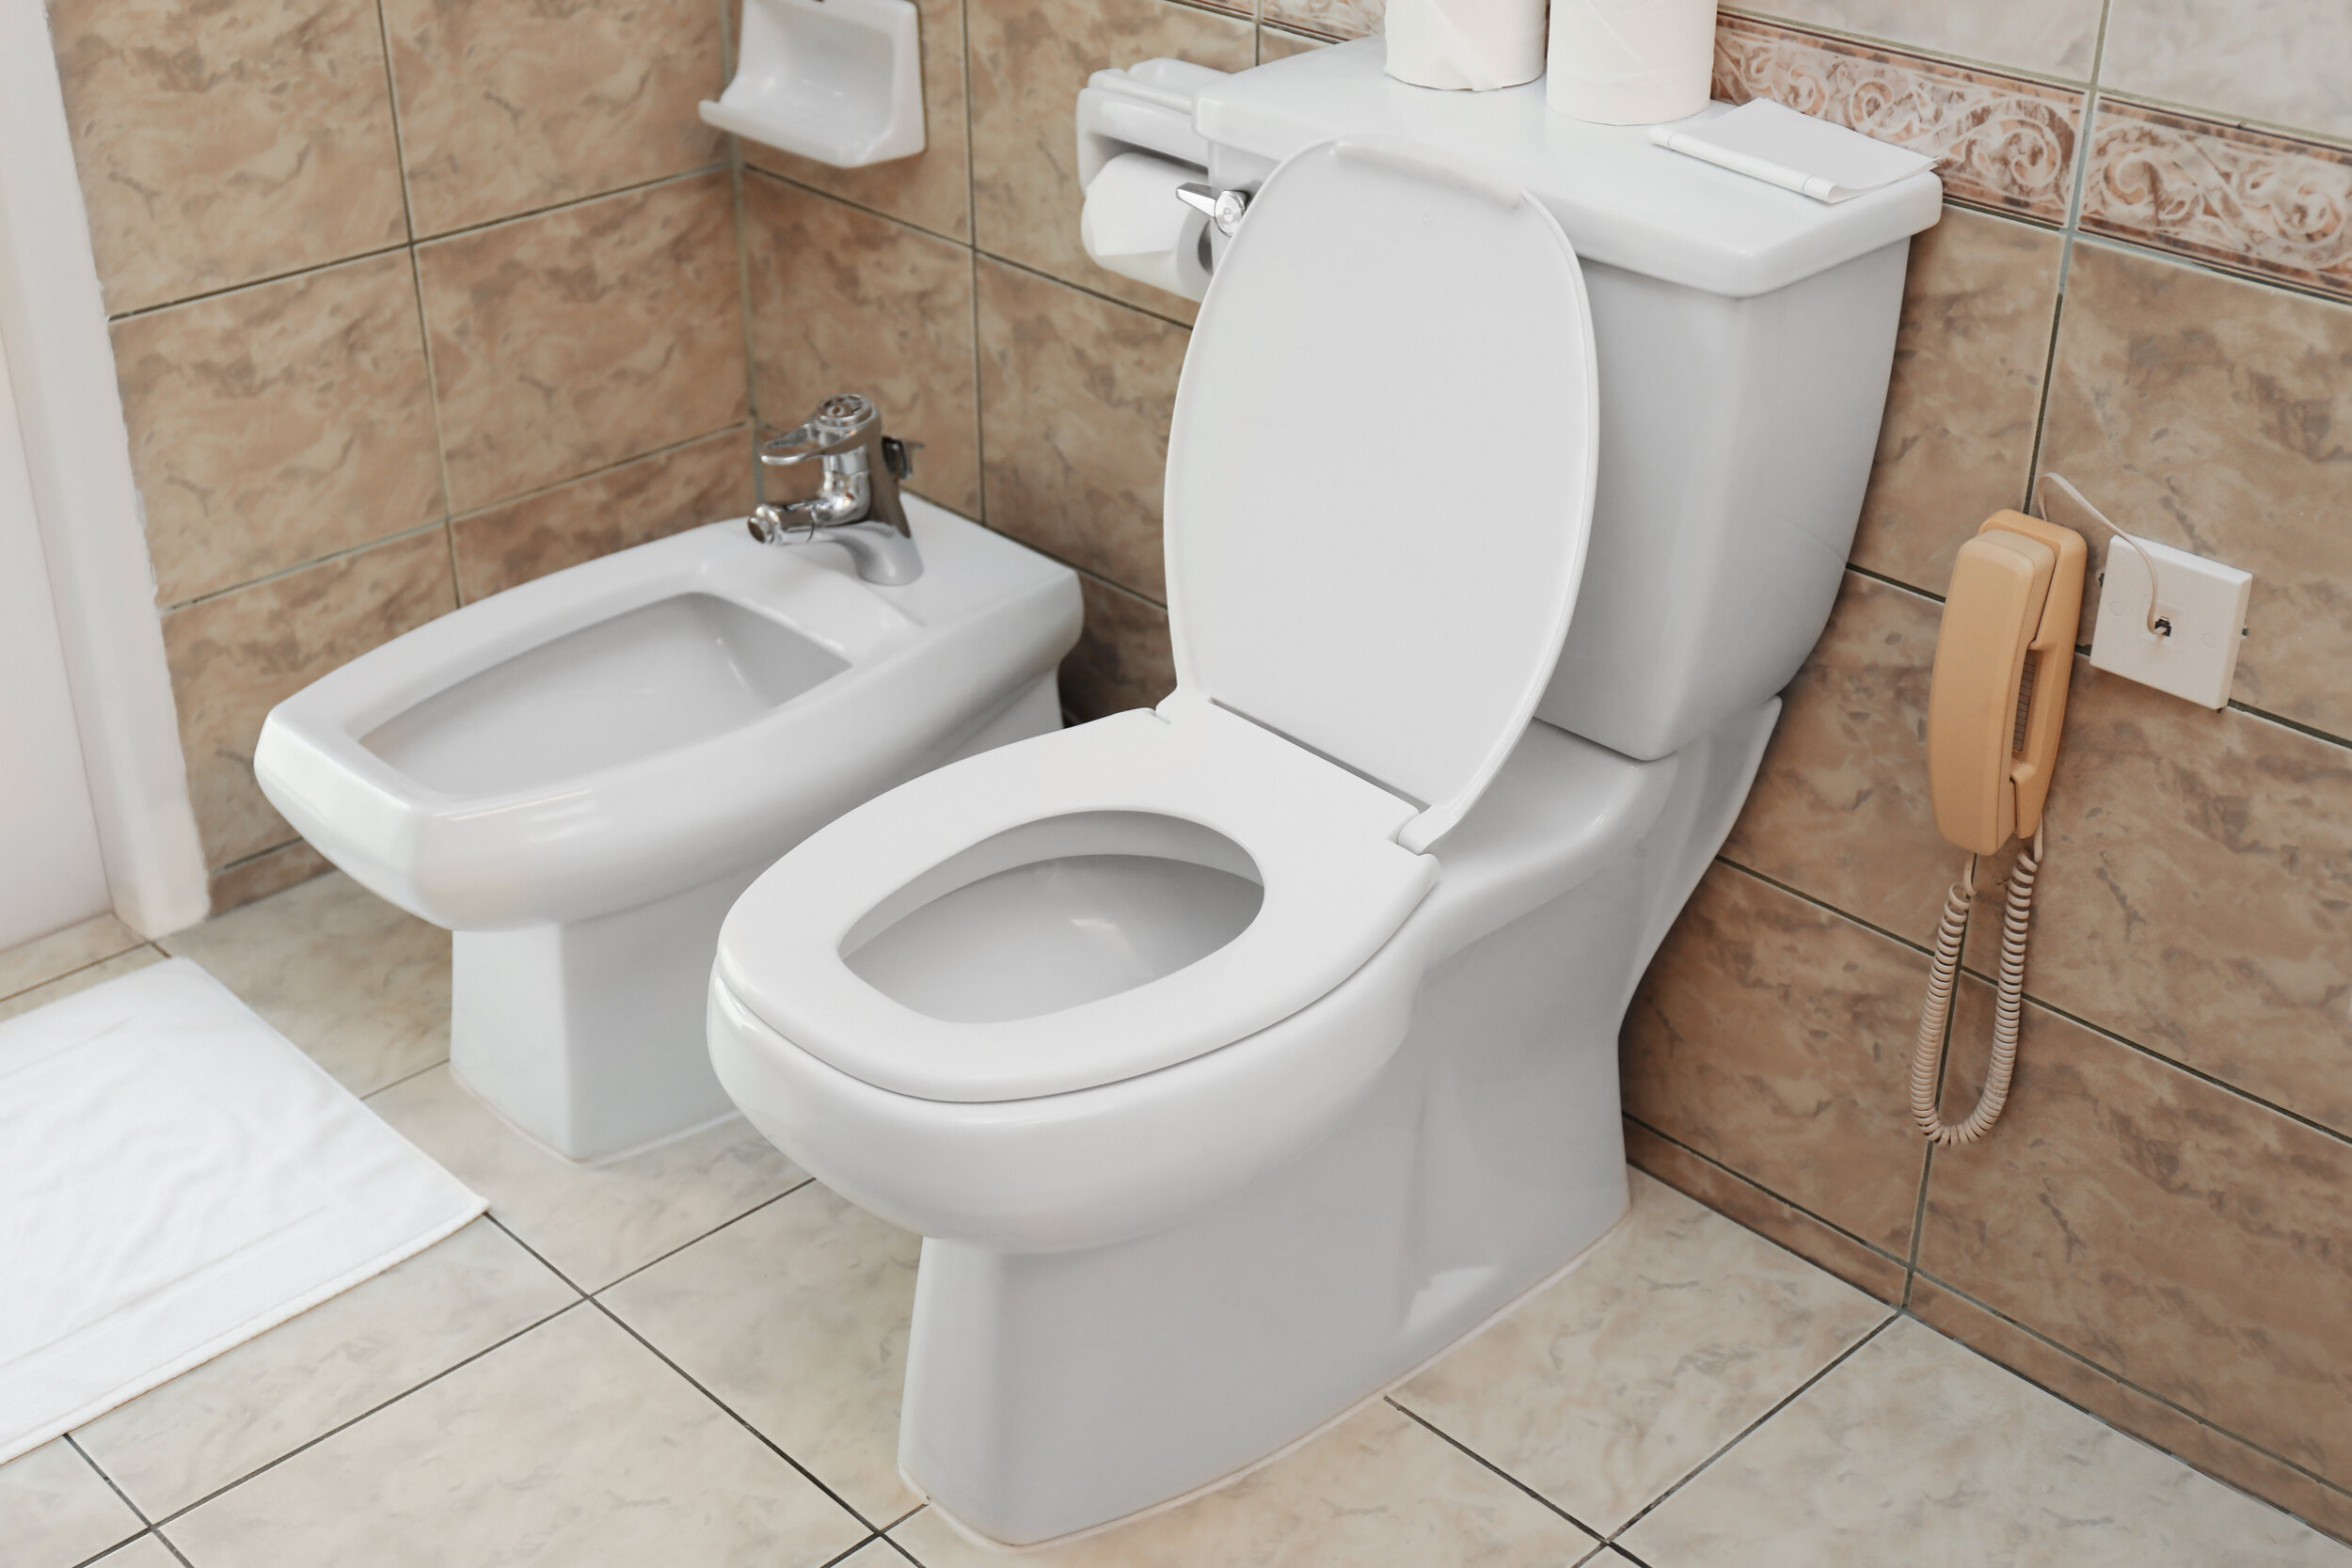 A Toilet And Bidet Combo Is The Only Way No Toilet Paper No Problem Build With A Bang